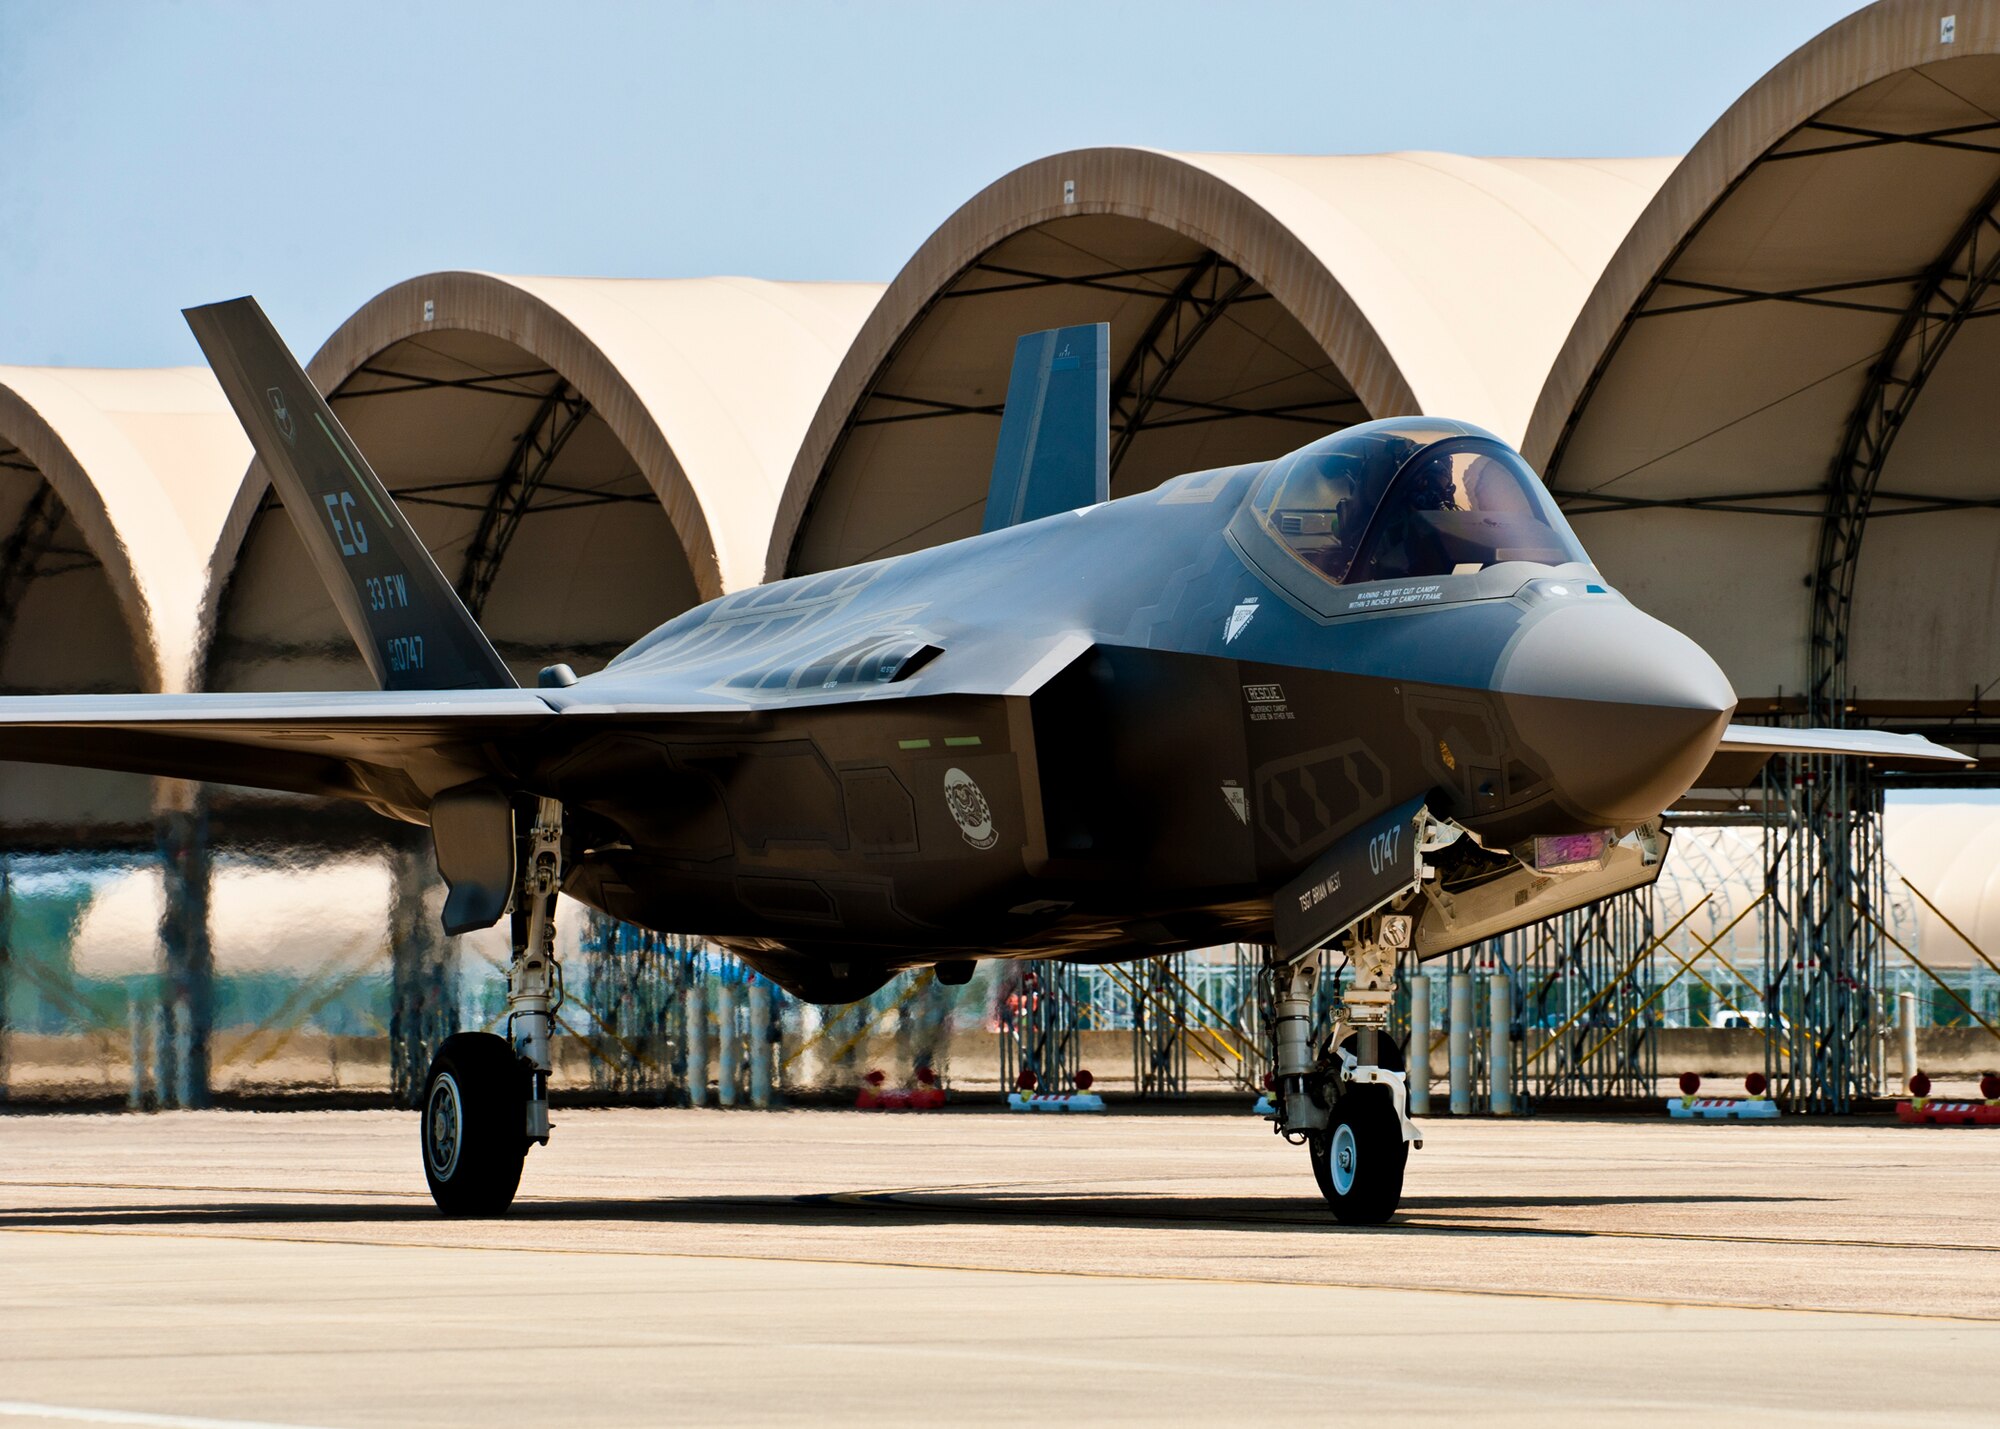 DoD's newest aircraft, the F-35 Lightning II joint strike fighter, taxis across the 33rd Fighter Wing flightline at Eglin Air Force Base, Fla., July 14.  (U.S. Air Force photo/Samuel King Jr.)